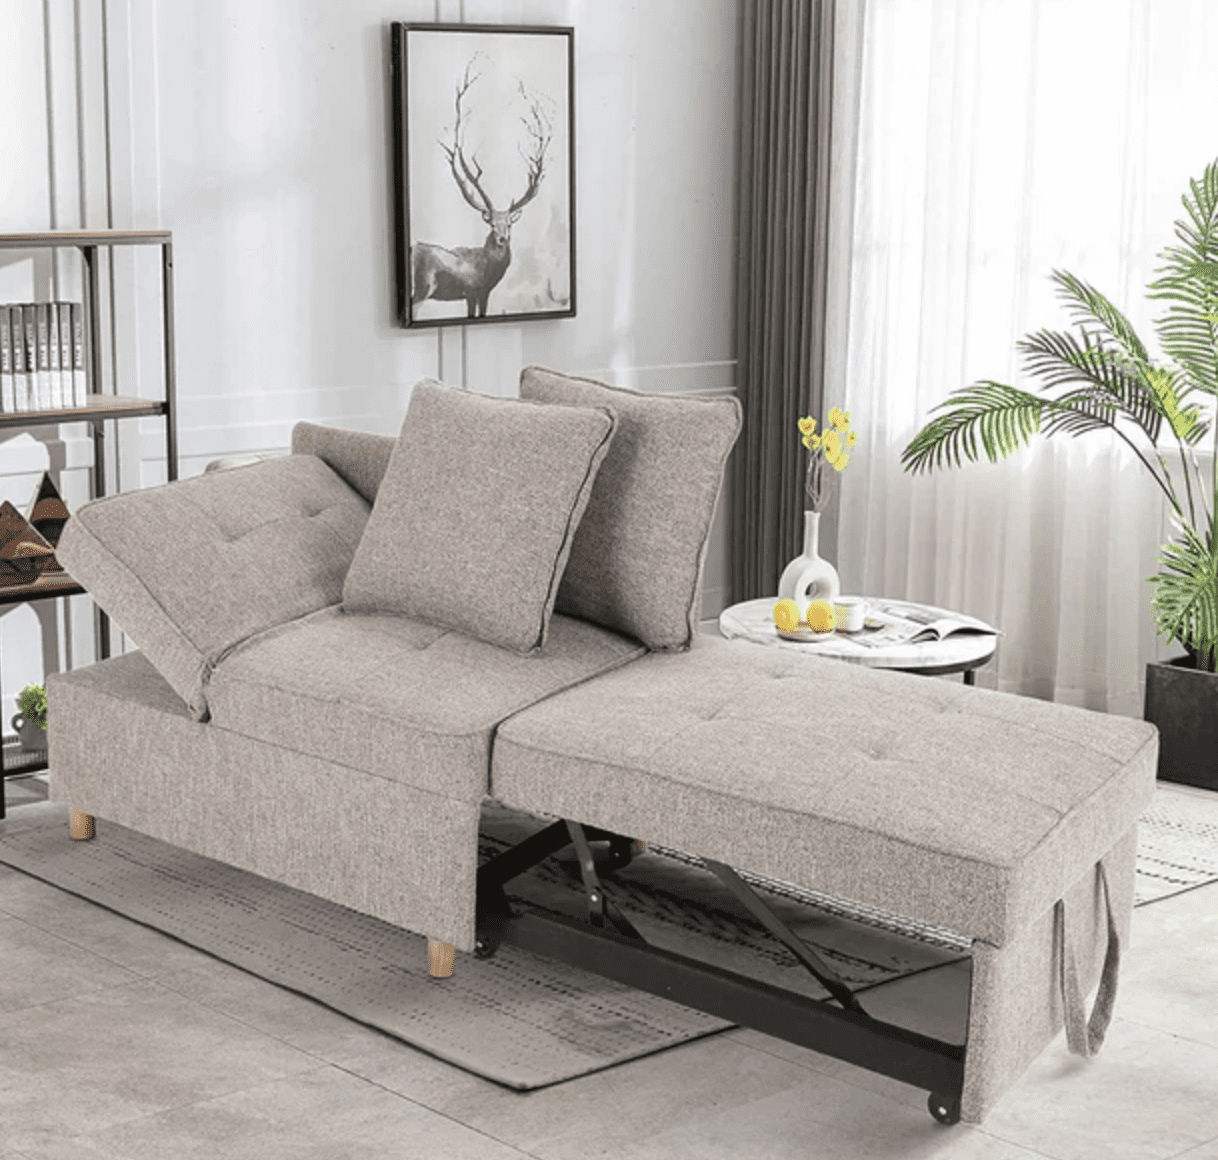 Walmart 4 In 1 Convertible Sofa: It'S Perfect For Small Spaces | Apartment  Therapy In 4 In 1 Convertible Sleeper Chair Beds (Photo 10 of 15)